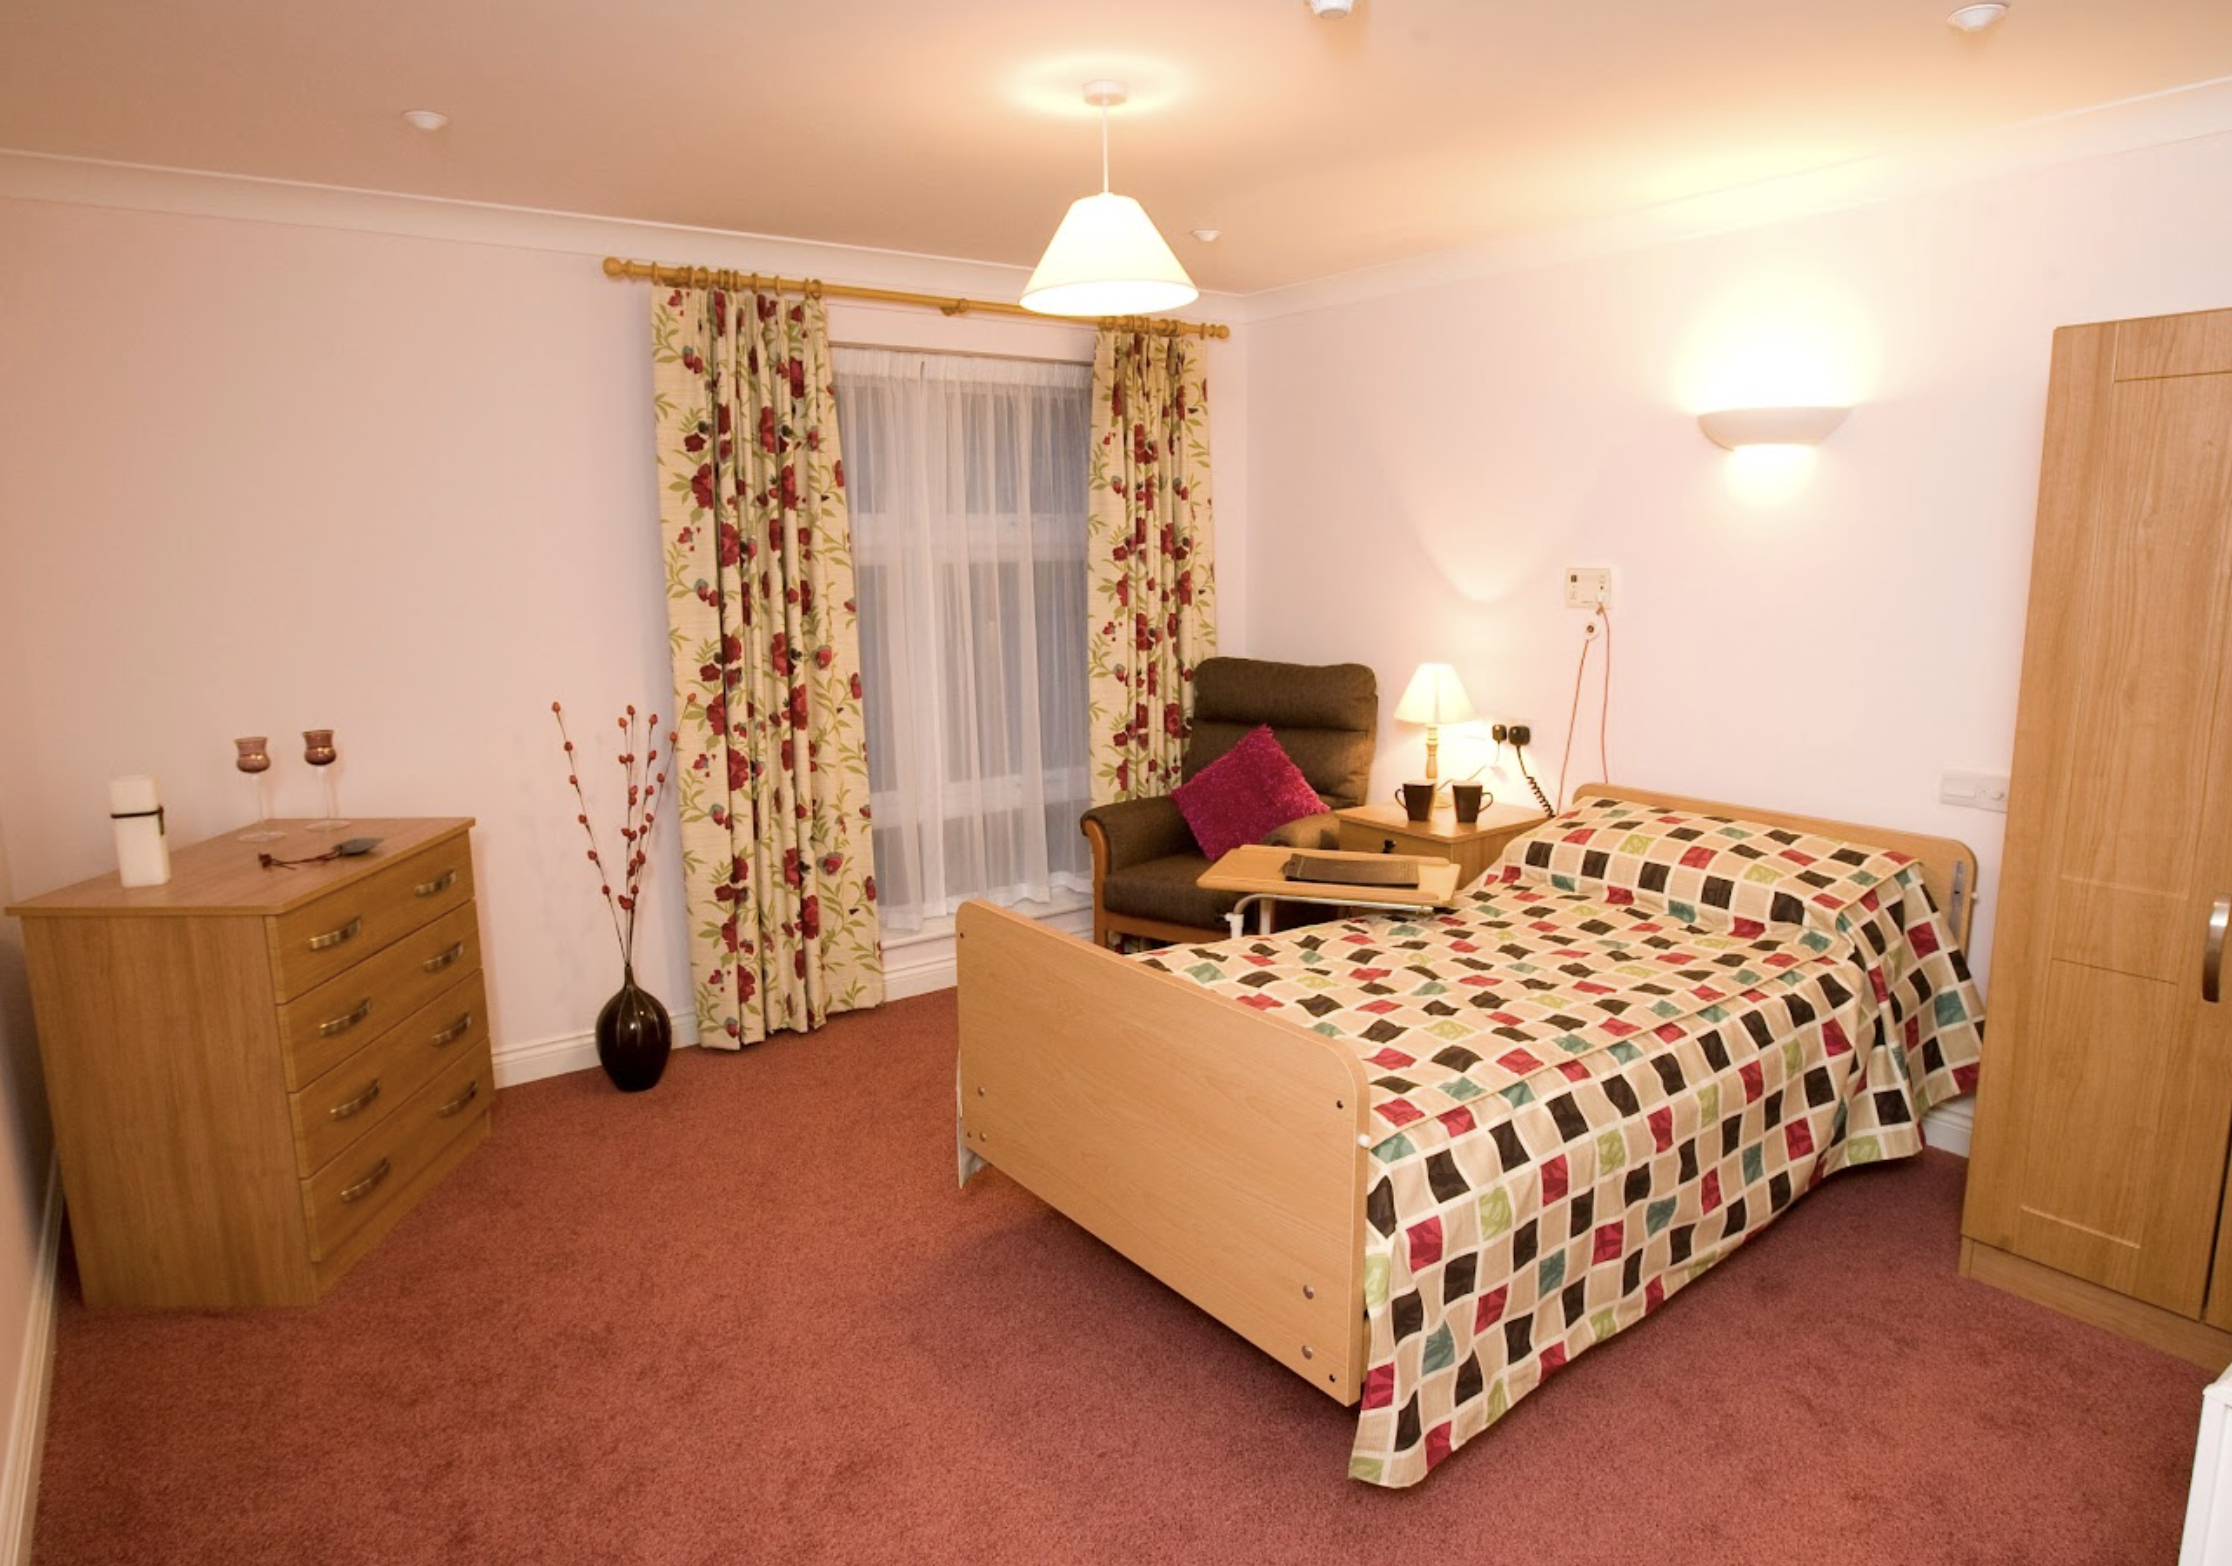 Bedroom of Shire Hall care home in Cardiff, Wales